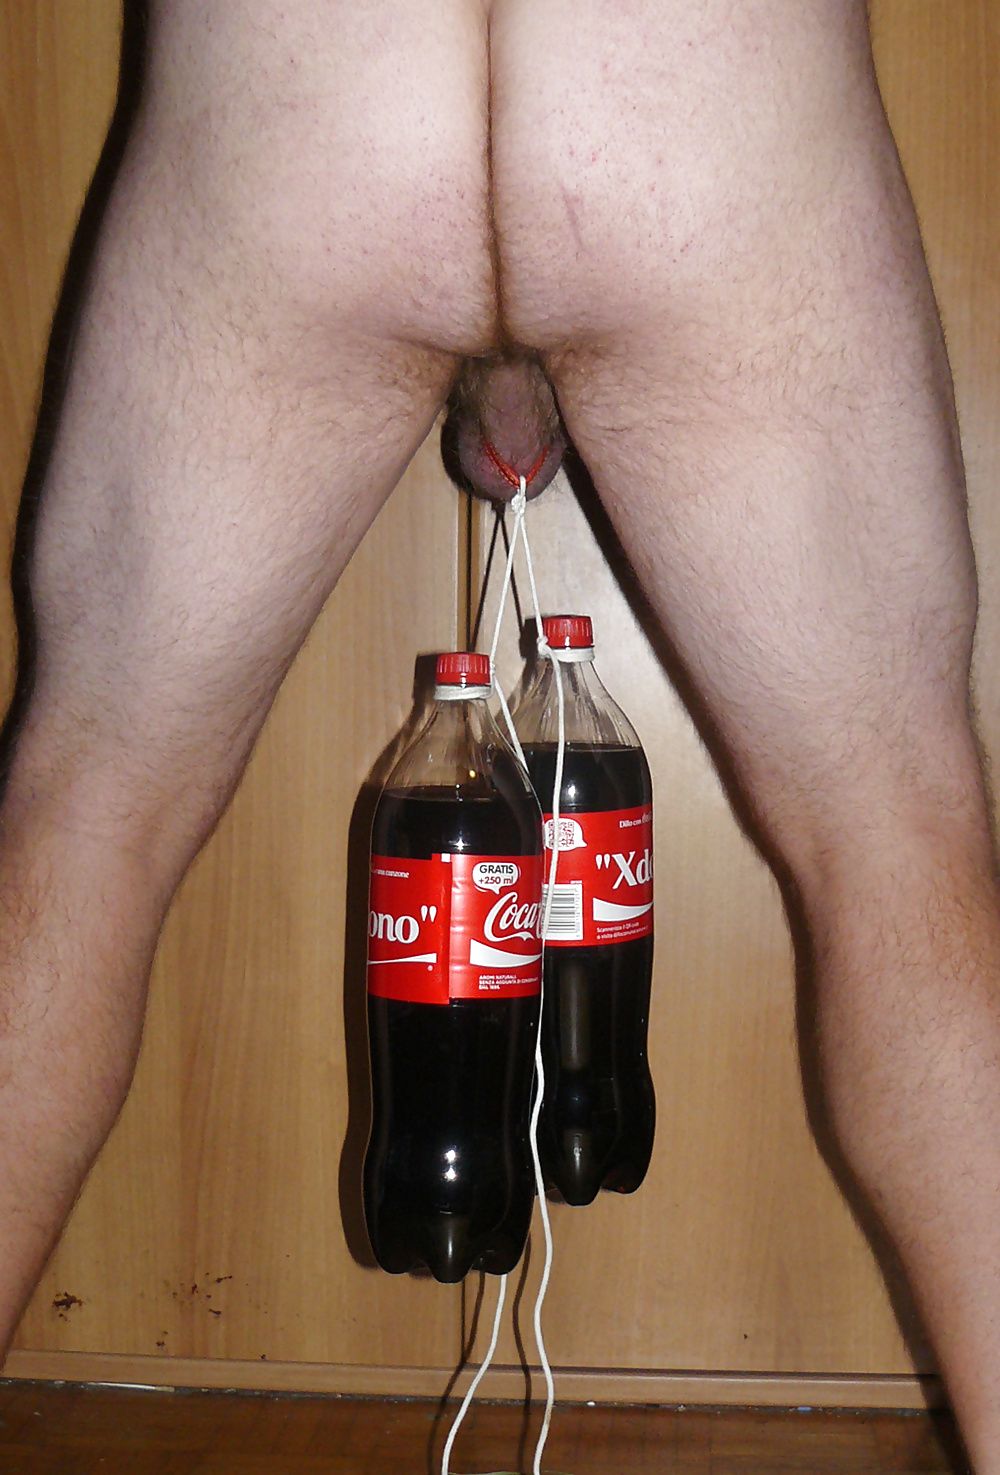 cbt with coca cola bottle #14